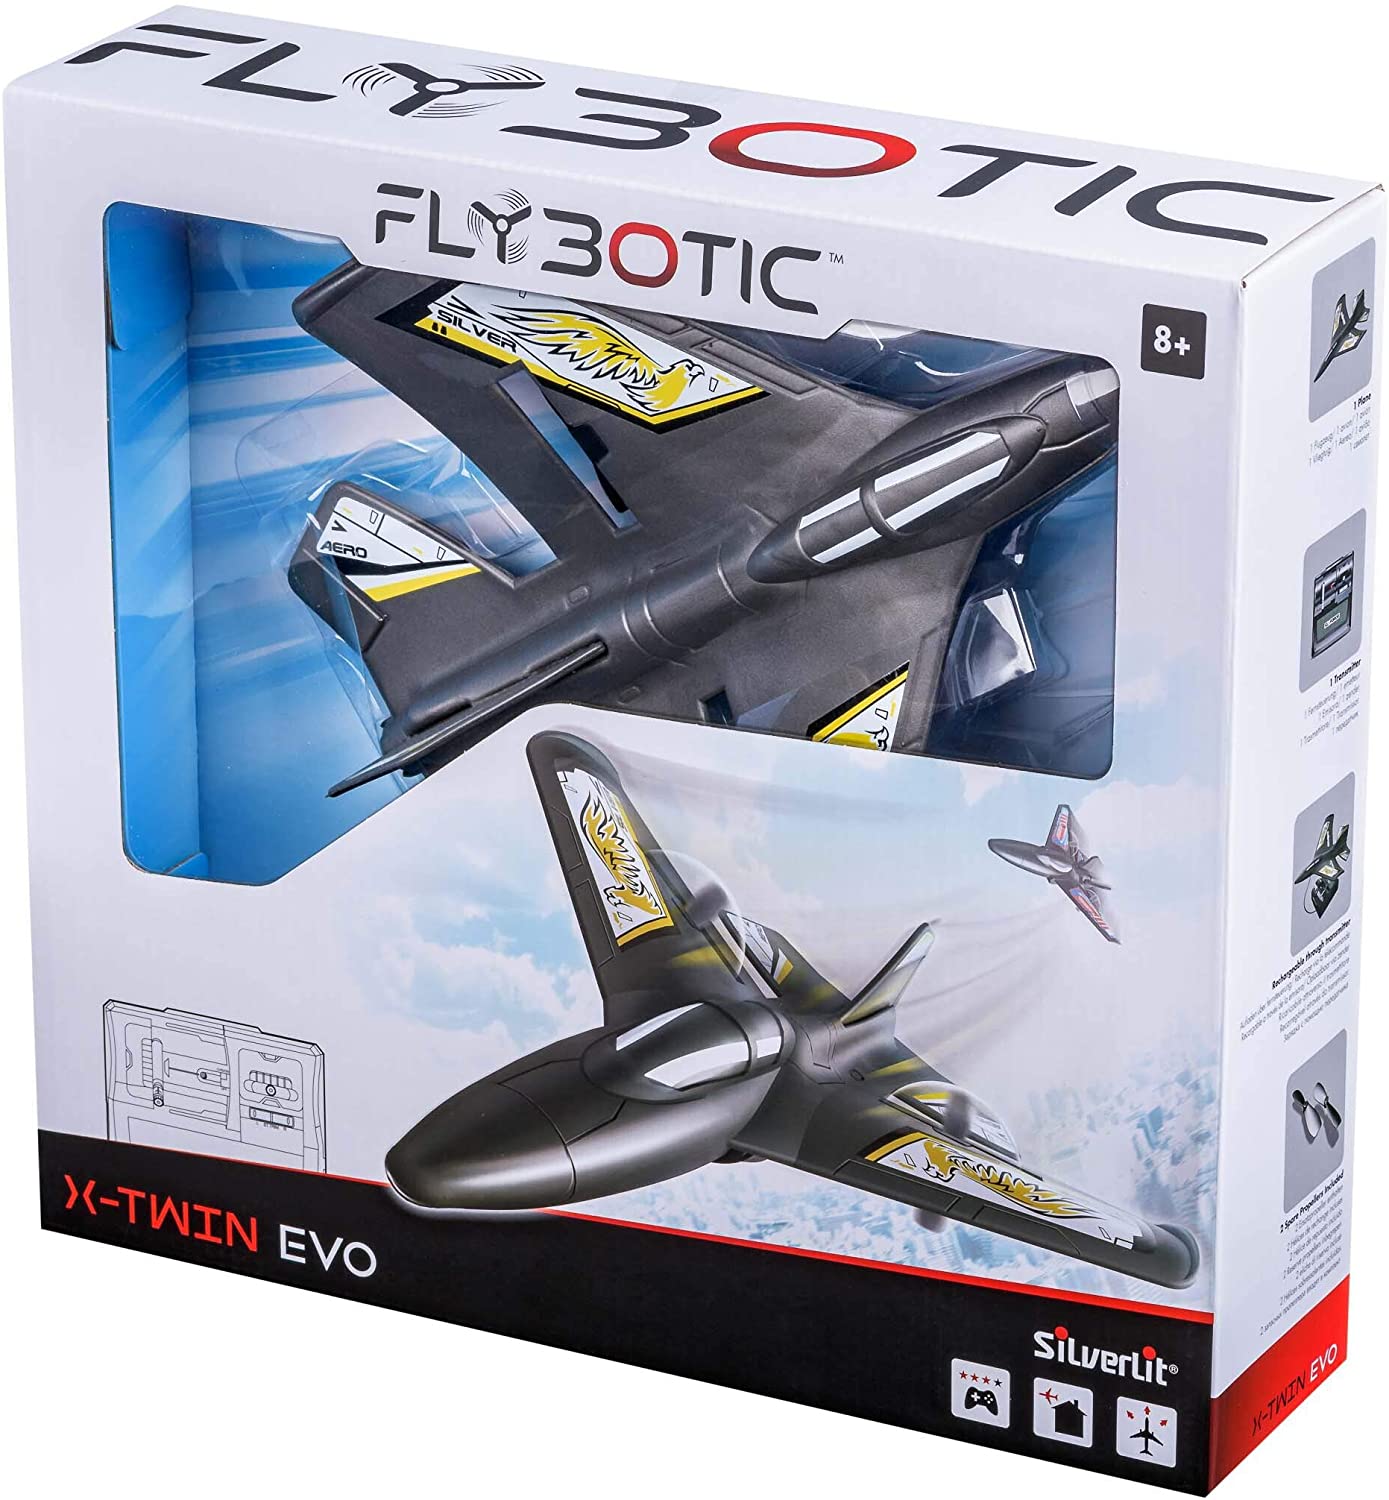 Flybotic X-Twin Evo Remote Controlled Aircraft